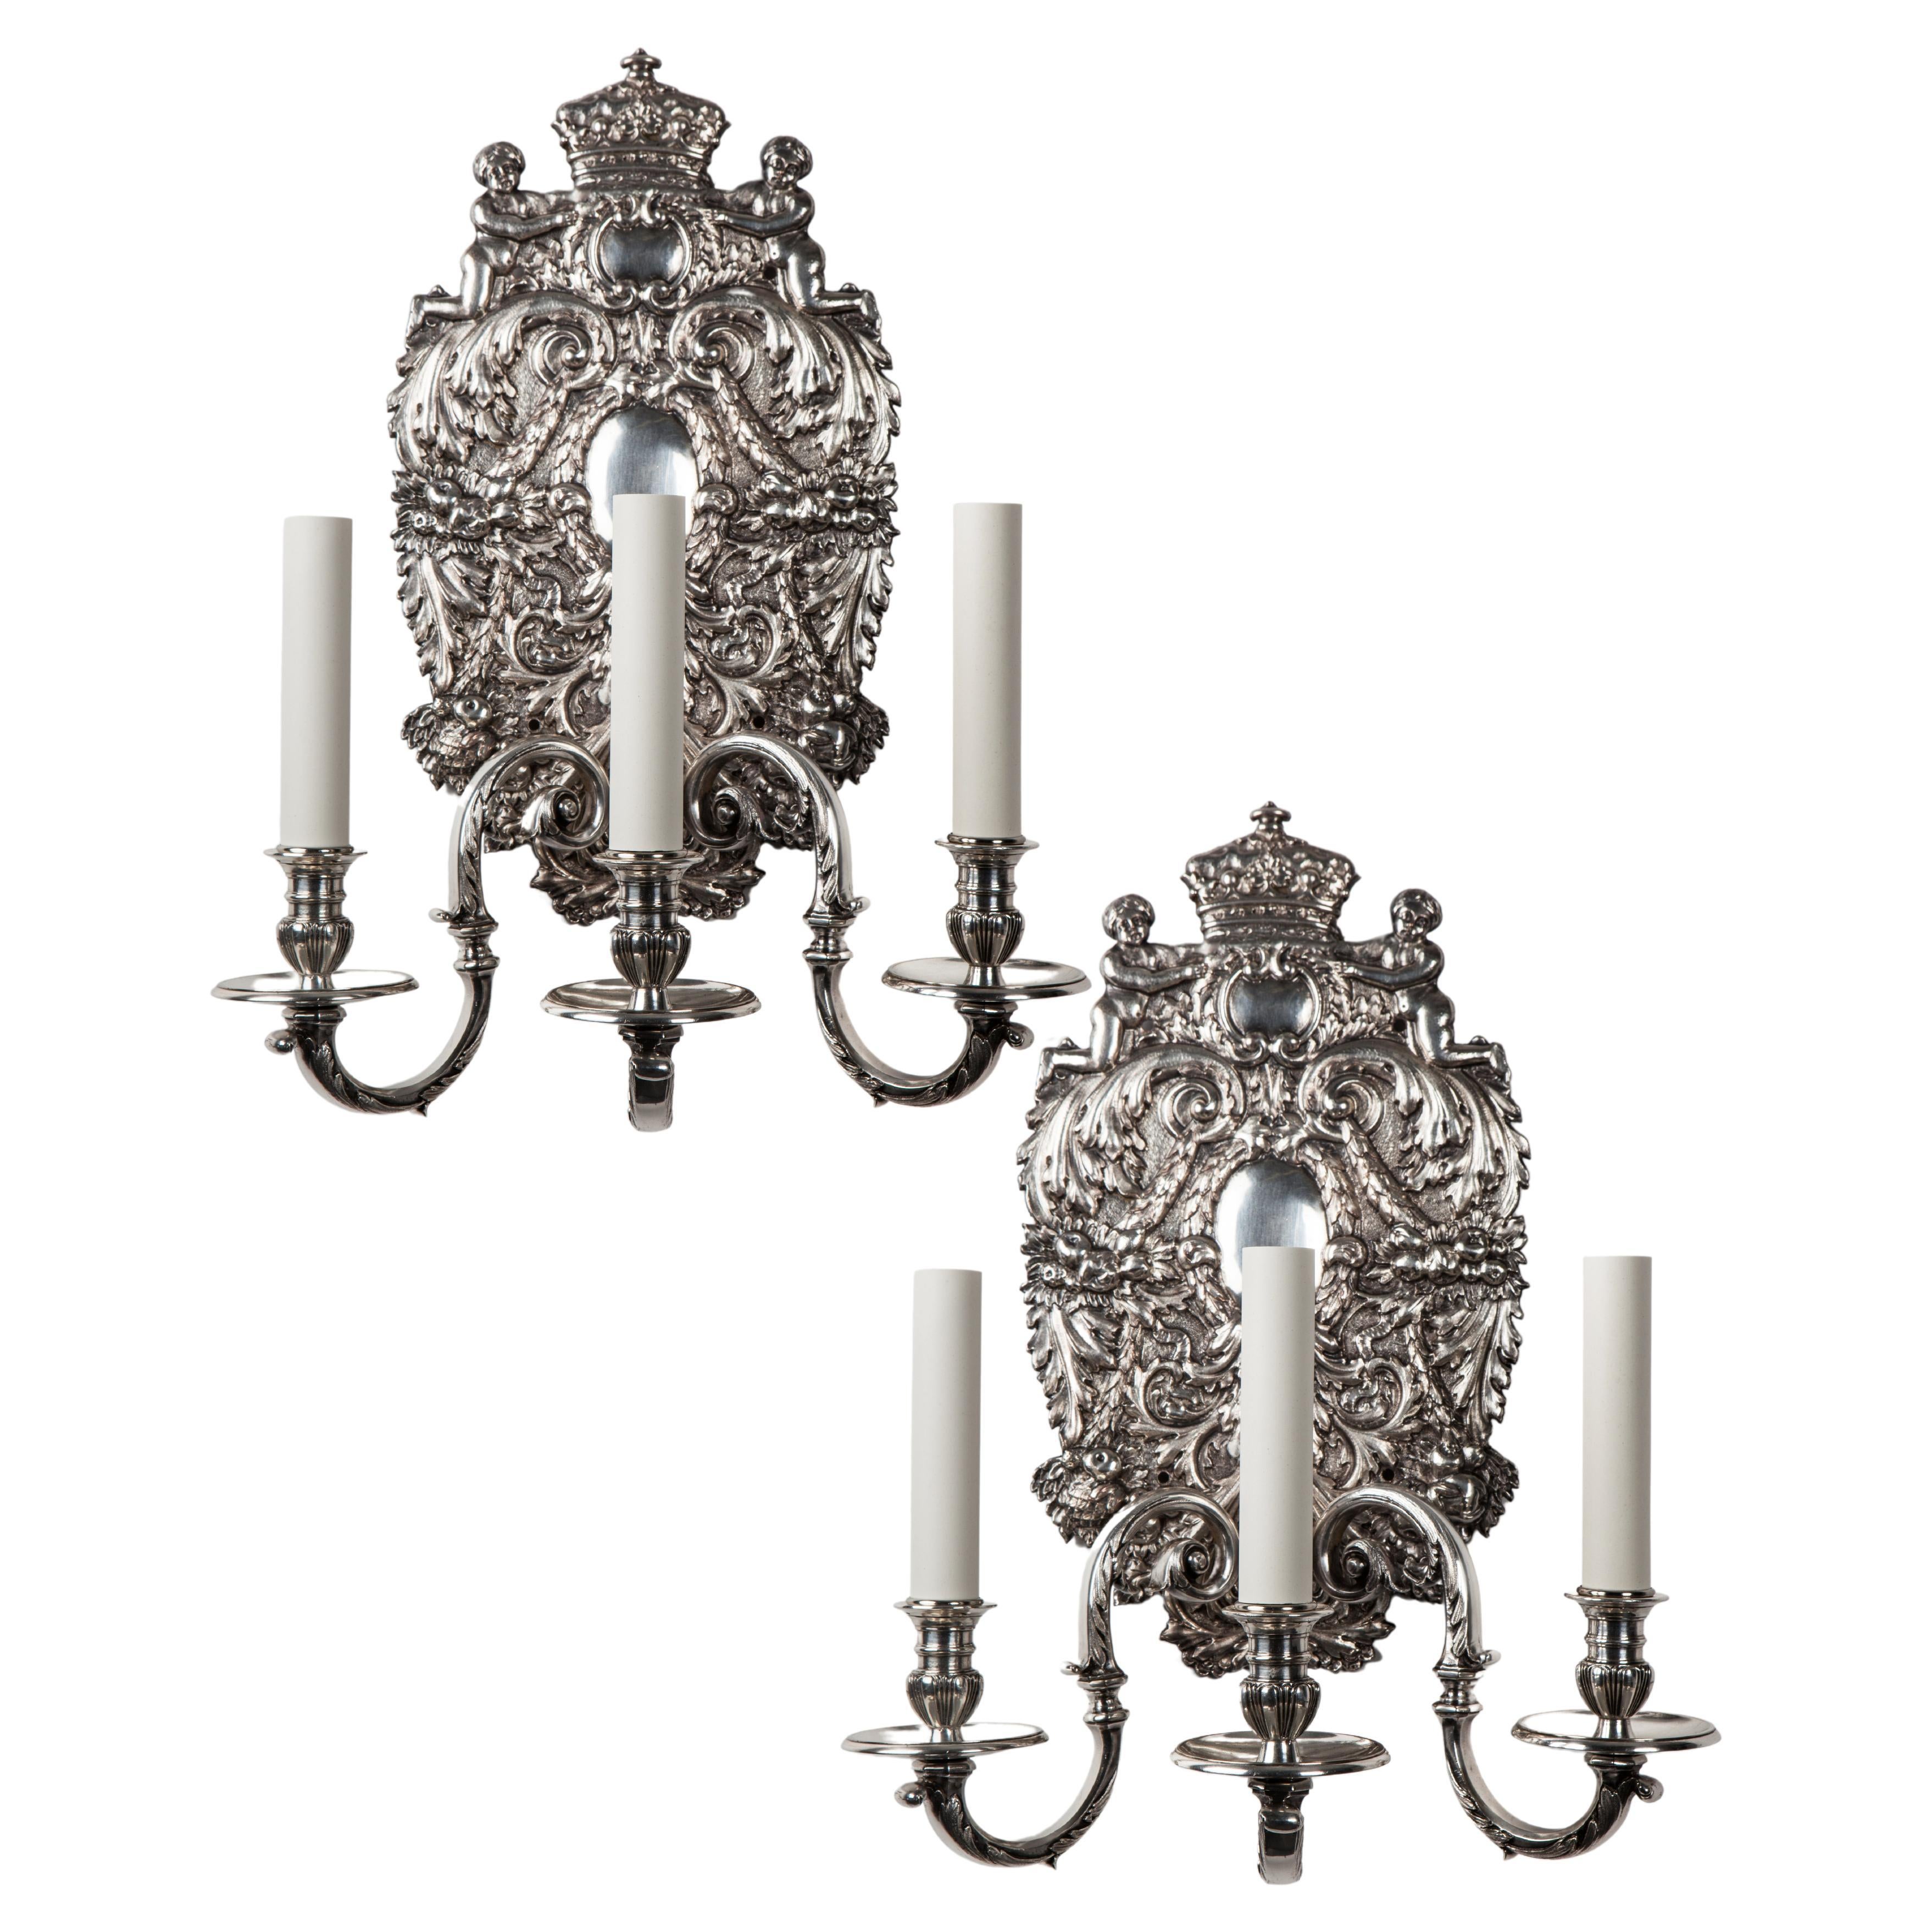 Three Arm Silver Plate Sconce Pair with George II Style Bas Relief, Circa 1900